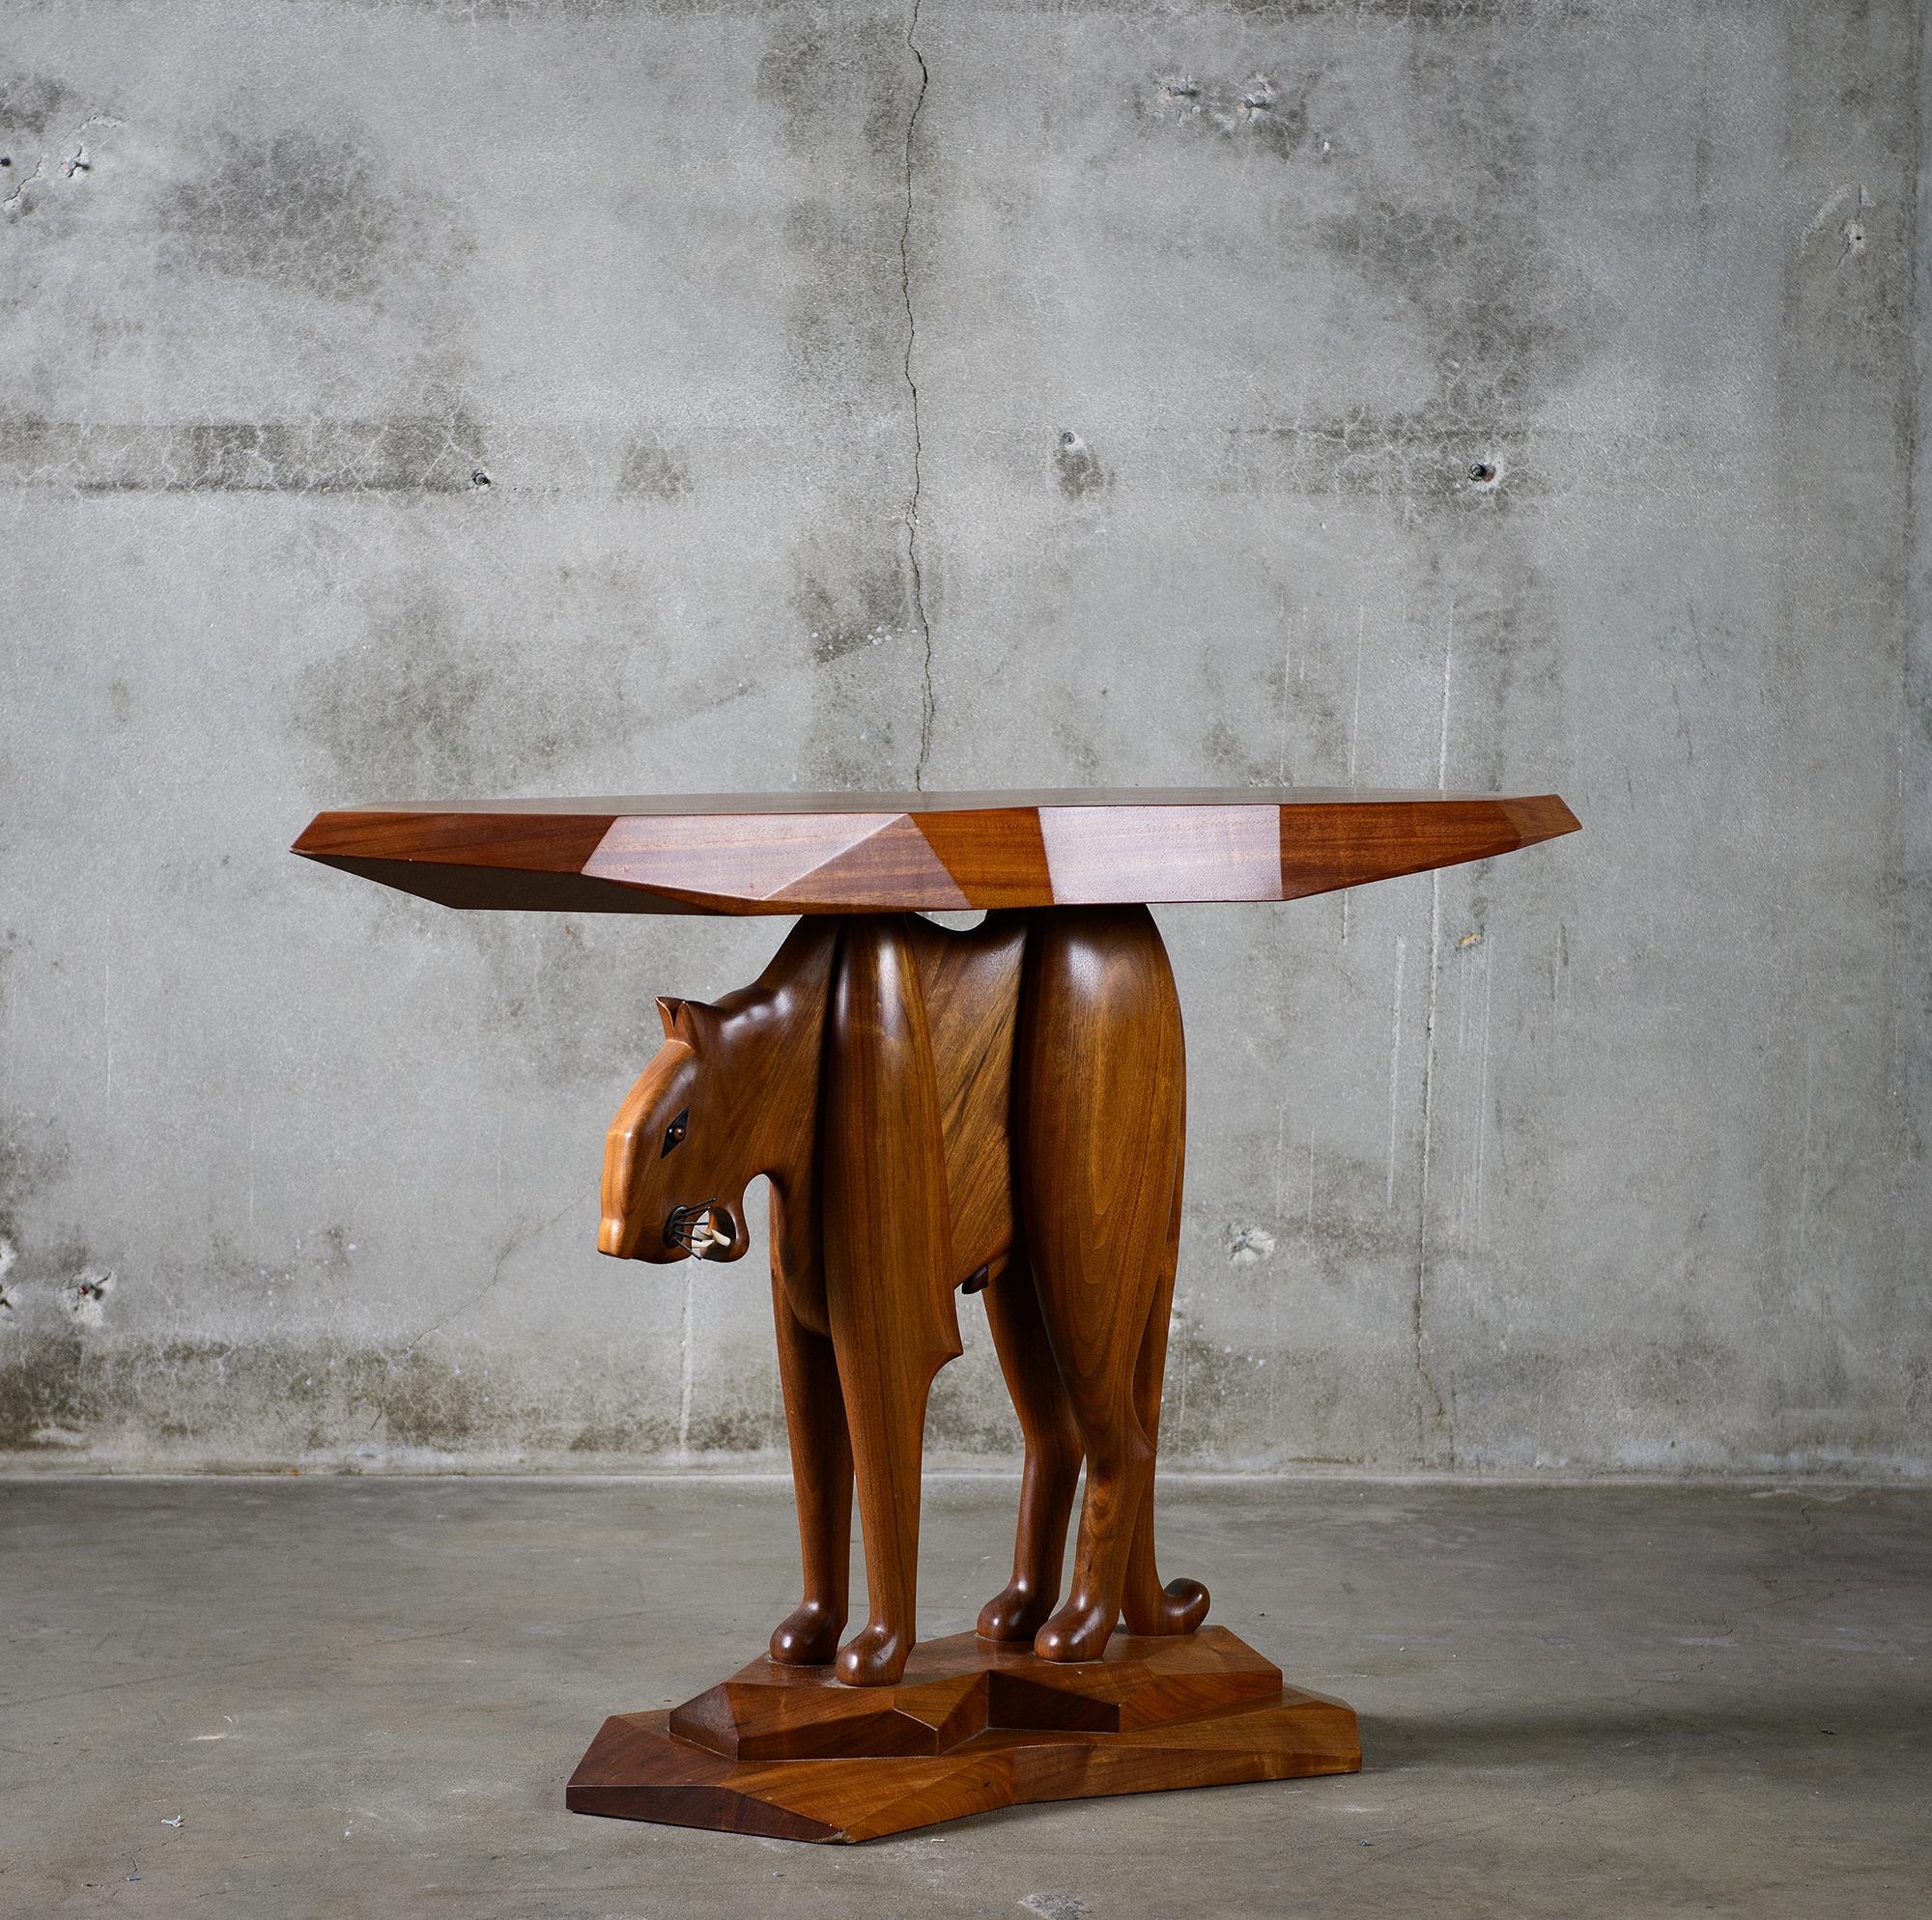 A walnut, rosewood, ebony and metal table by Robert Whitley (American, b. 1925), top supported by leopard figure.